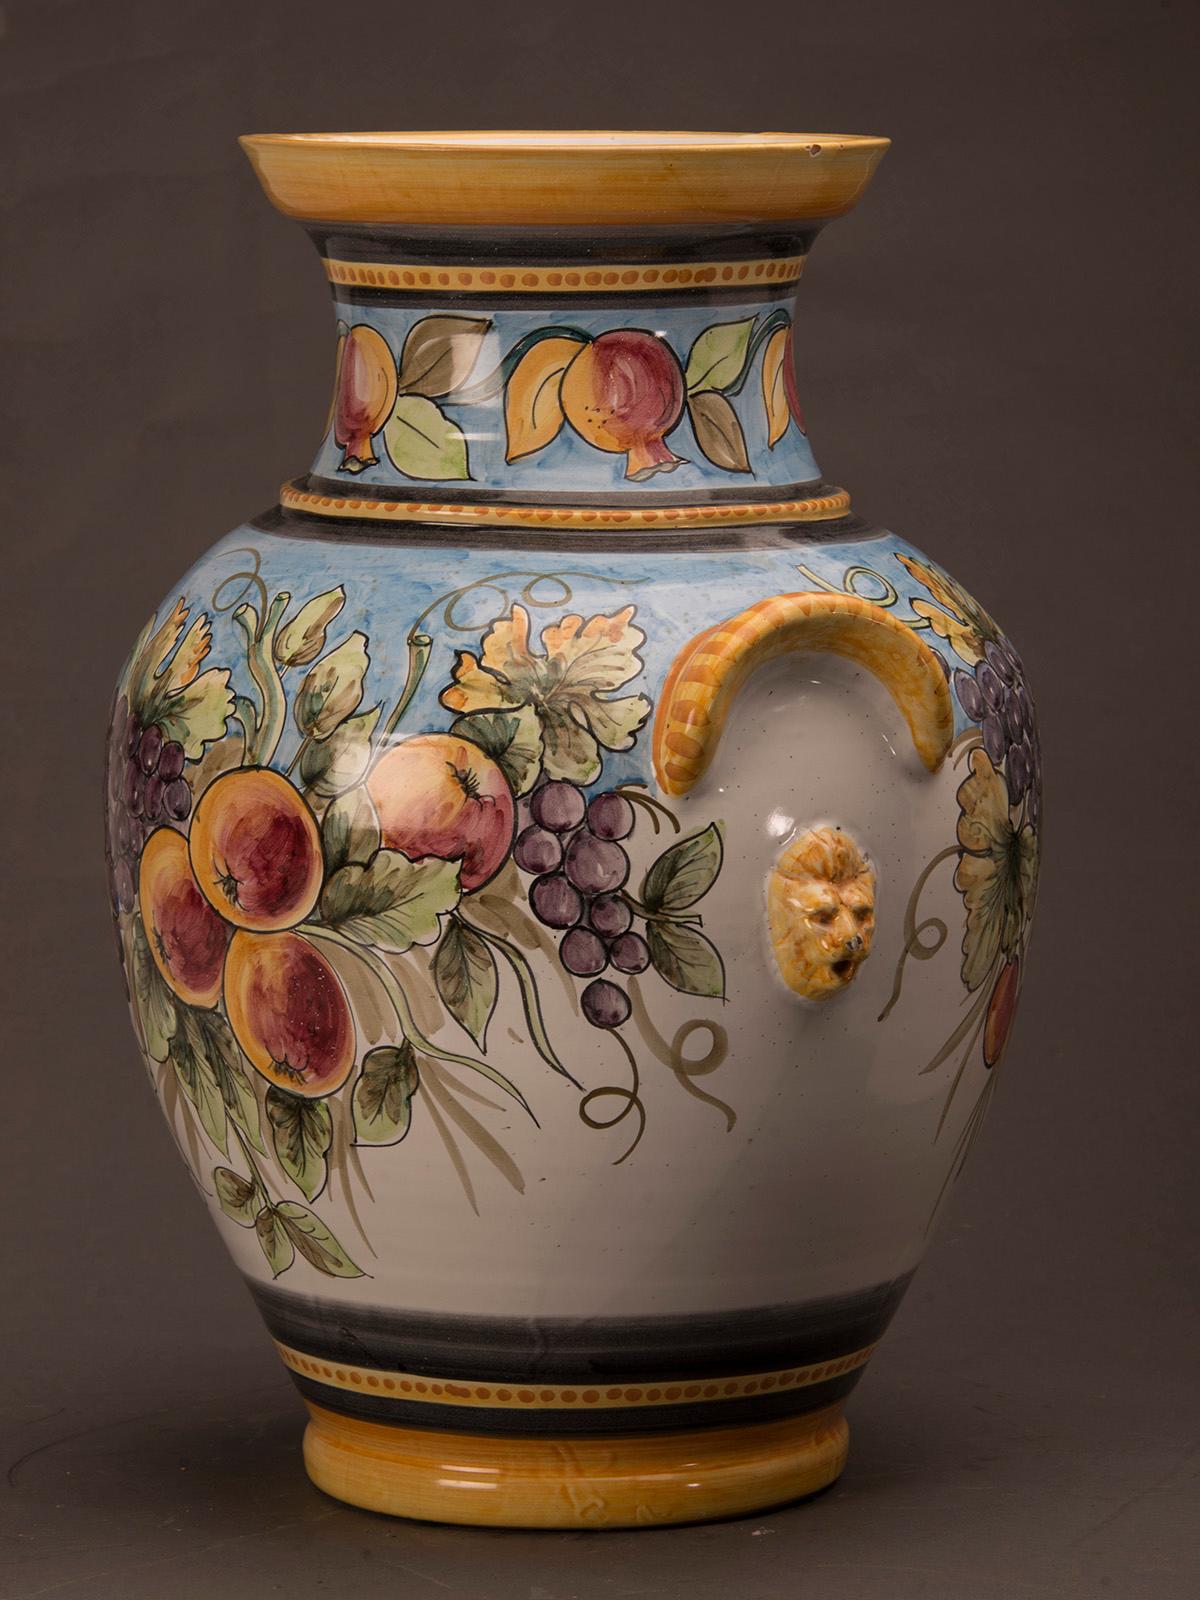 Huge Vintage Italian Hand Painted Terra Cotta Urn Vase by Solimene Vietri, Italy In Excellent Condition For Sale In Houston, TX